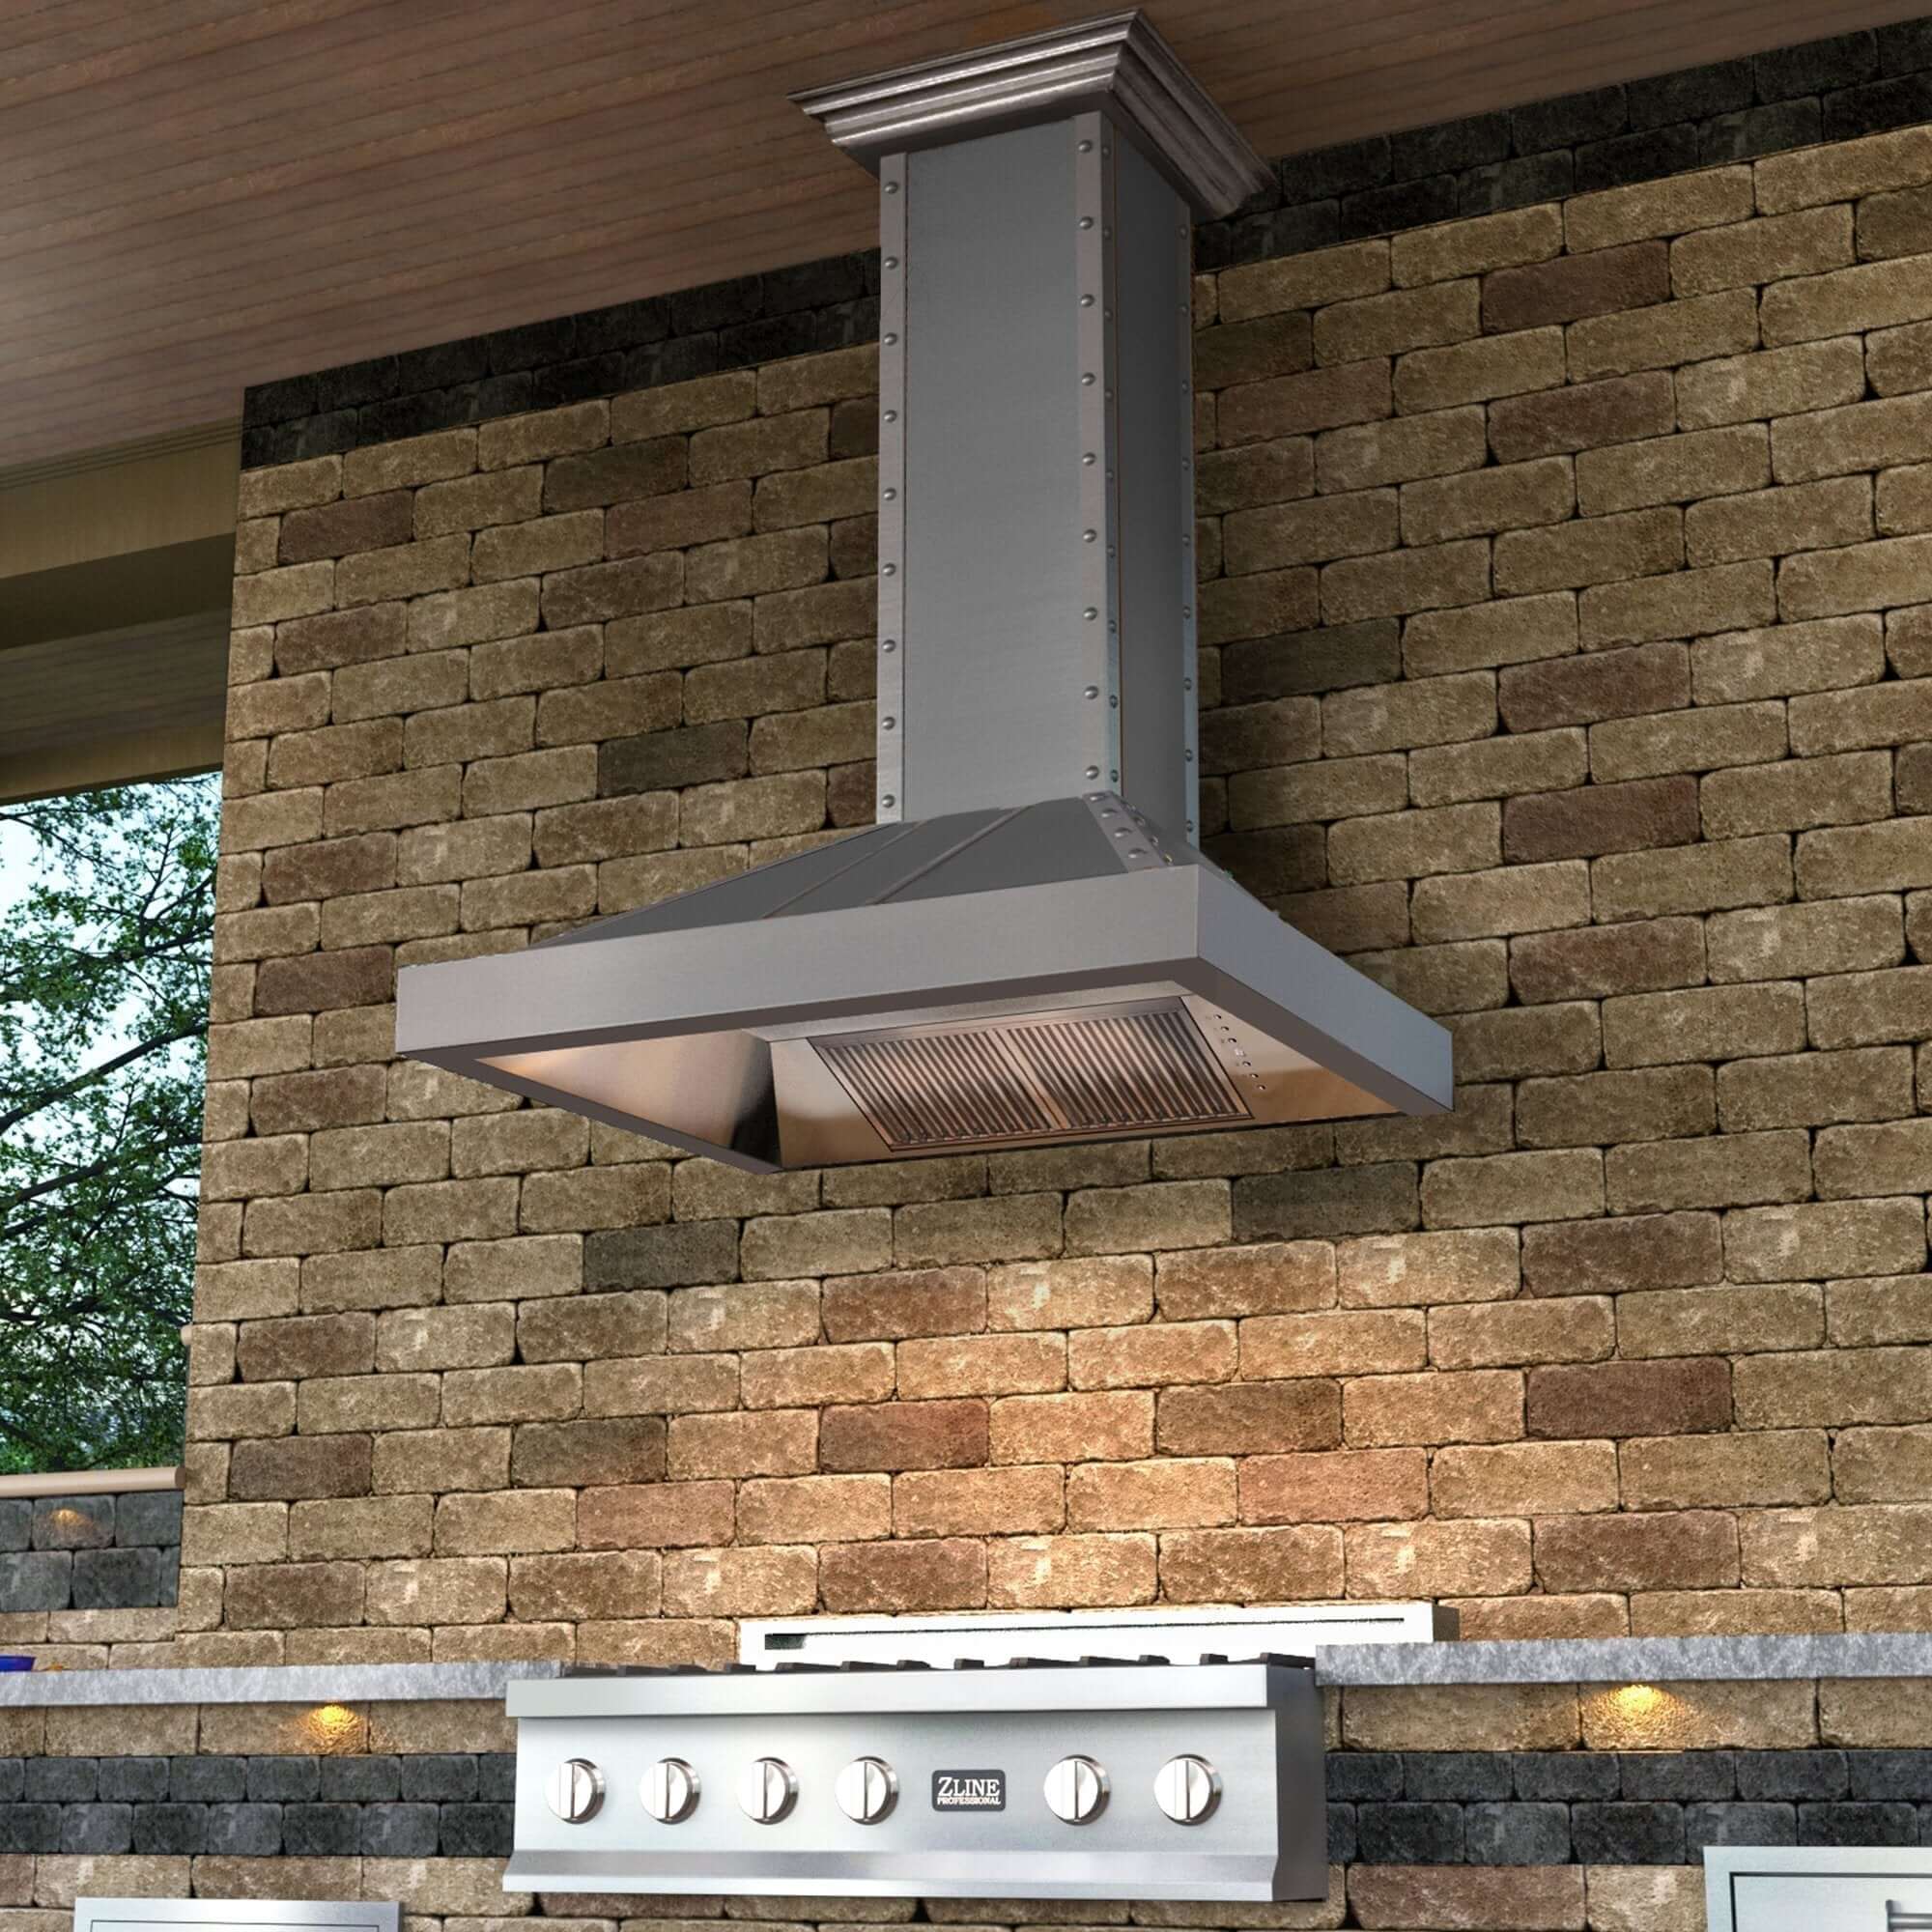 ZLINE Designer Series Wall Mount Range Hood in DuraSnow Stainless Steel with Nailhead Rivets (655-4SSSS) above and outdoor cooktop.